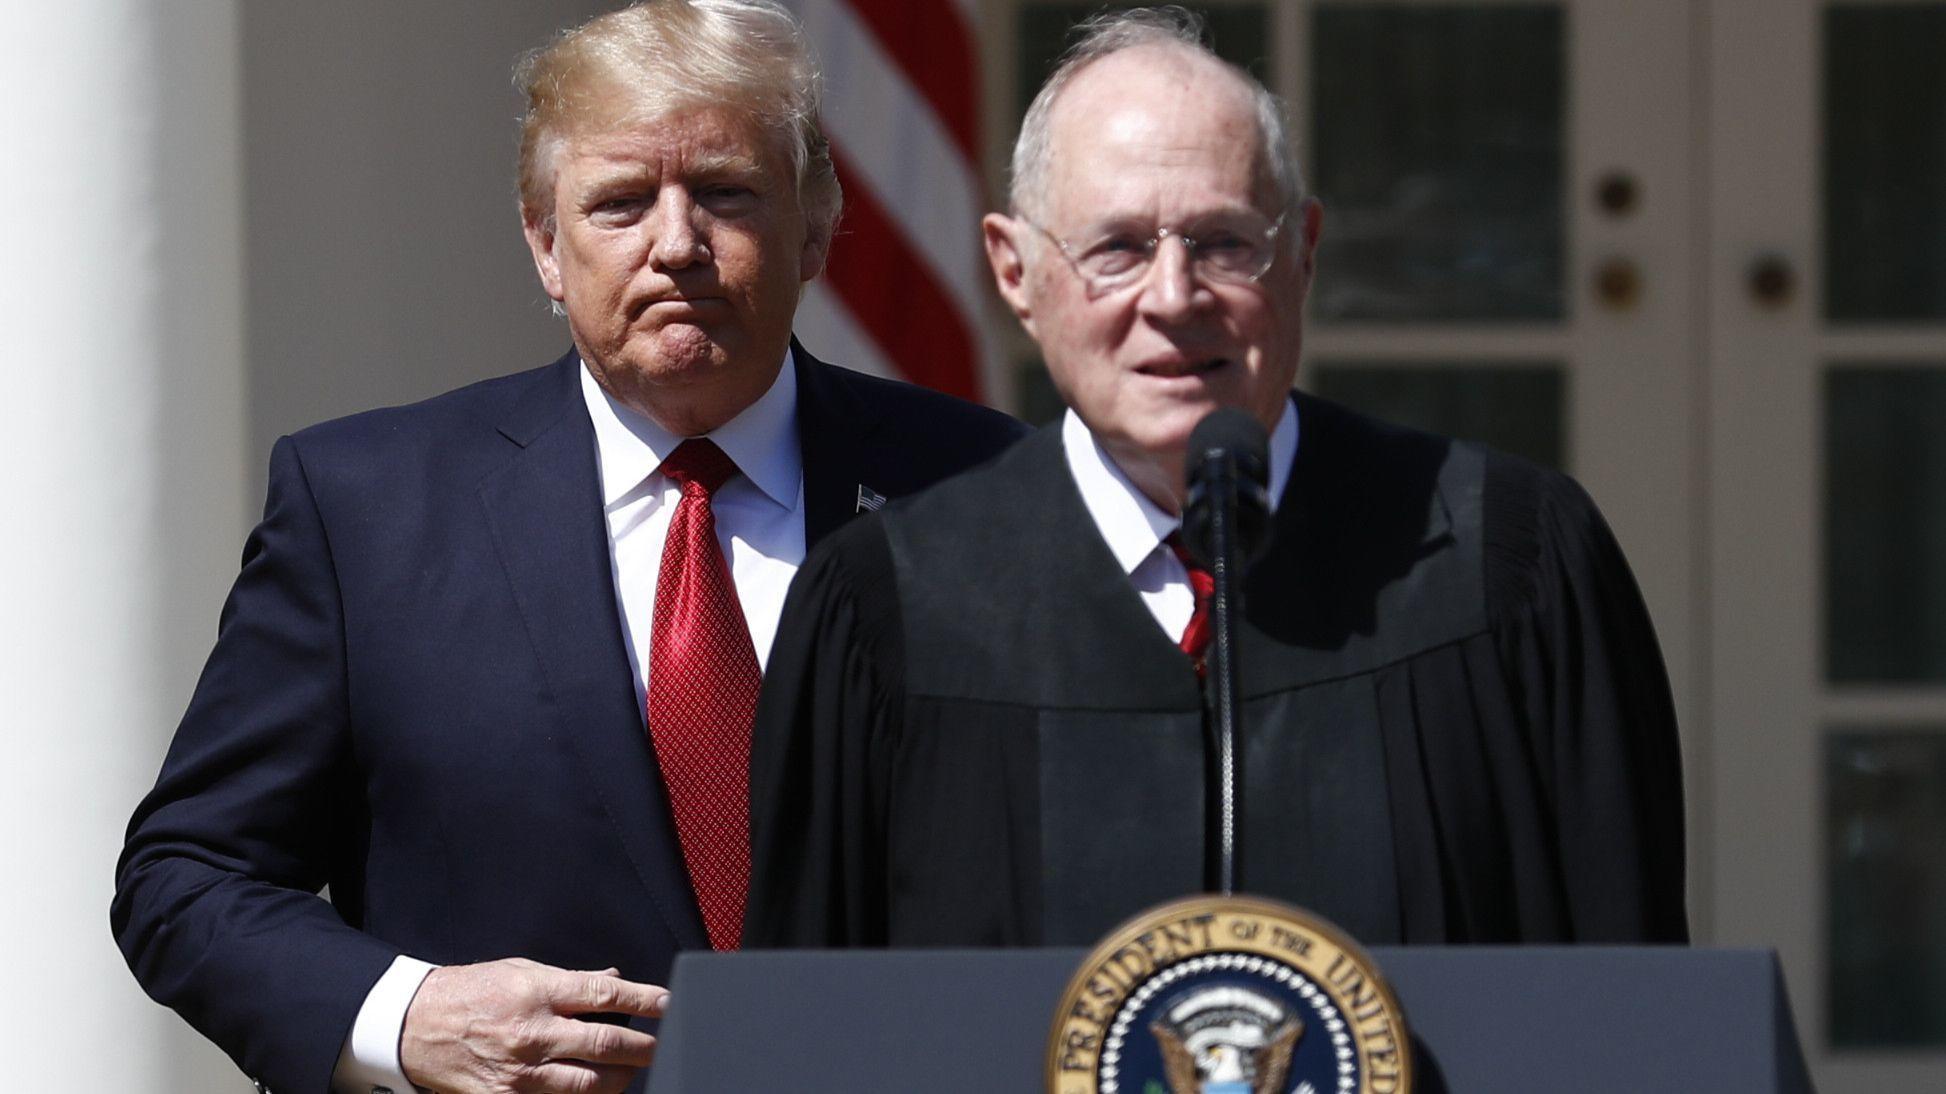 President Donald Trump and Justice Anthony Kennedy